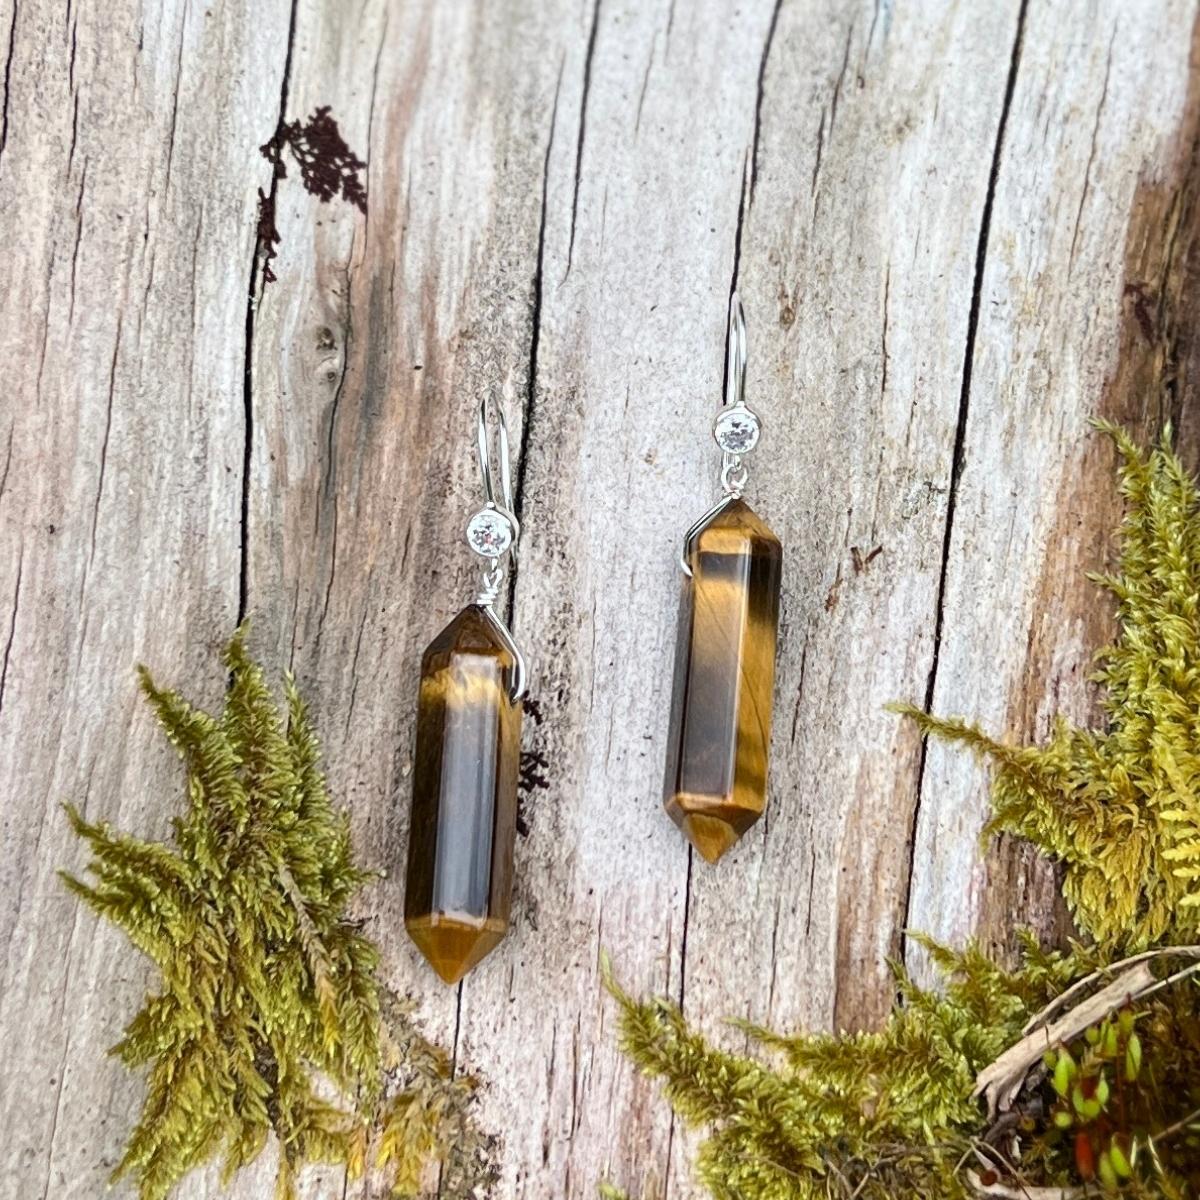 The Empowerment Enhancer Earrings made of Tiger Eye are a striking pair of earrings that embody the strength and confidence of the majestic tiger. Each earring features a polished Tiger Eye stone, which is known for its unique golden-brown color and distinctive chatoyancy, or "cat's eye" effect.